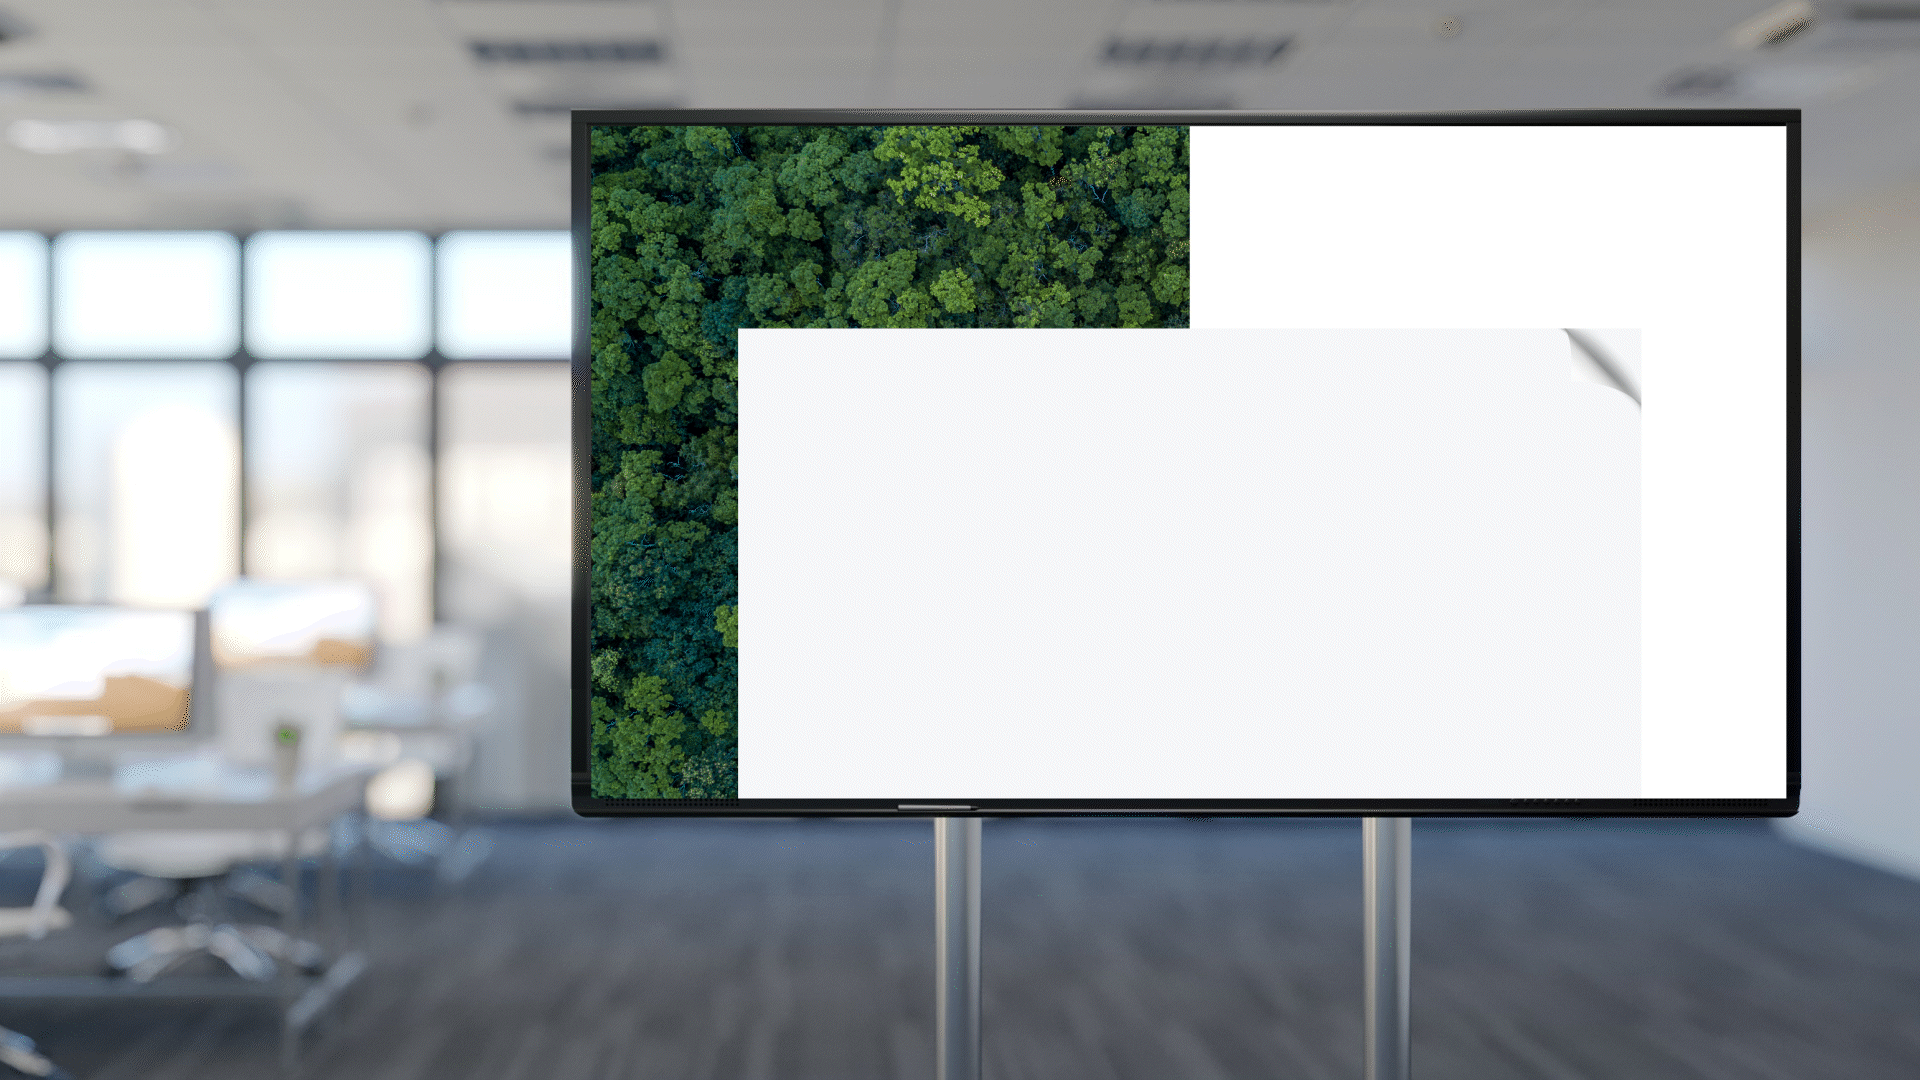 Conference room display animation on TV